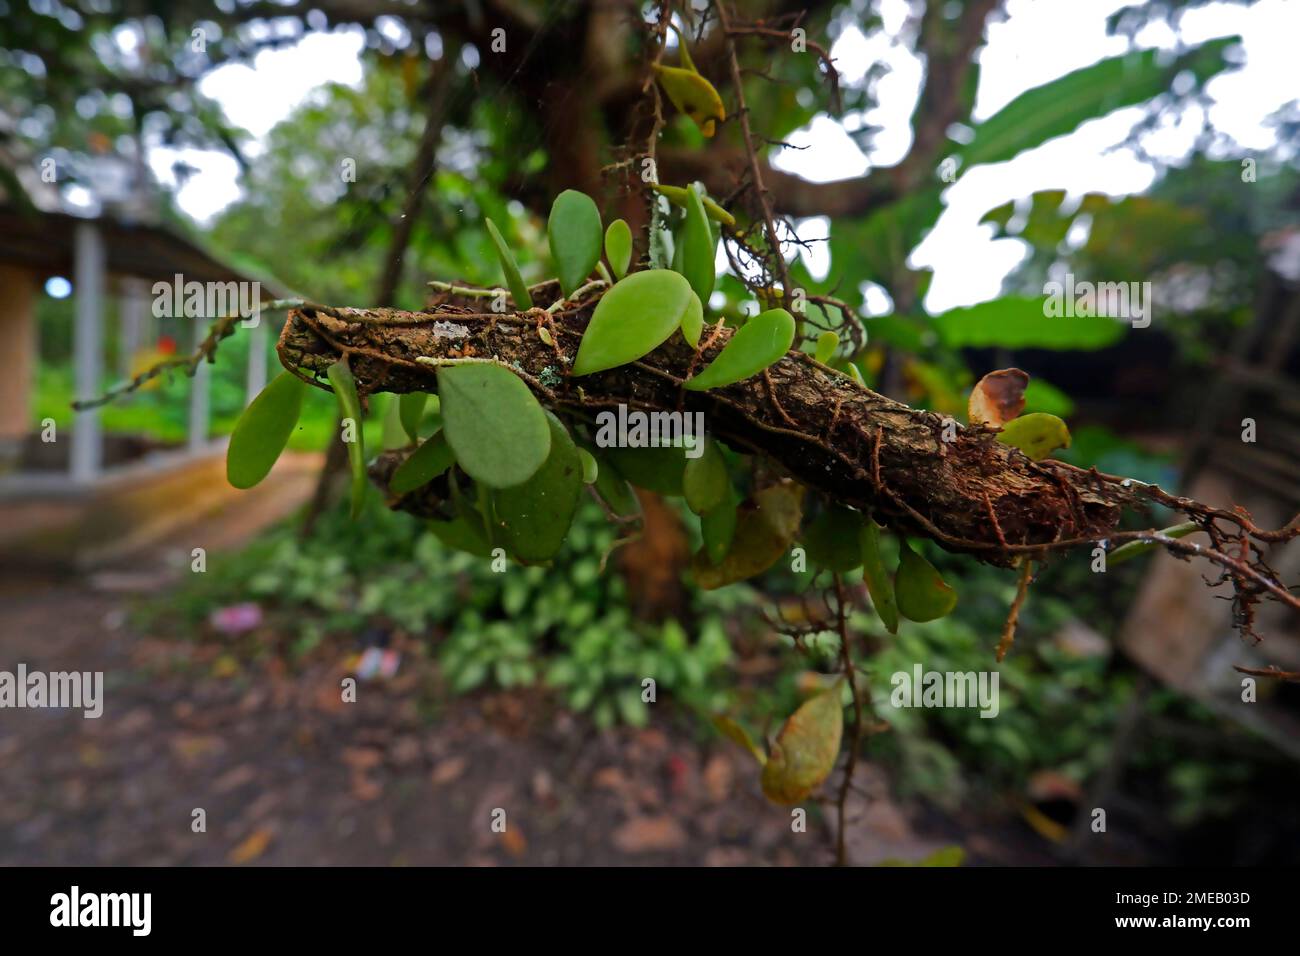 Dragon Scale Plant, Creeping And Hanging A Branch Of Dead Wood Stock Photo